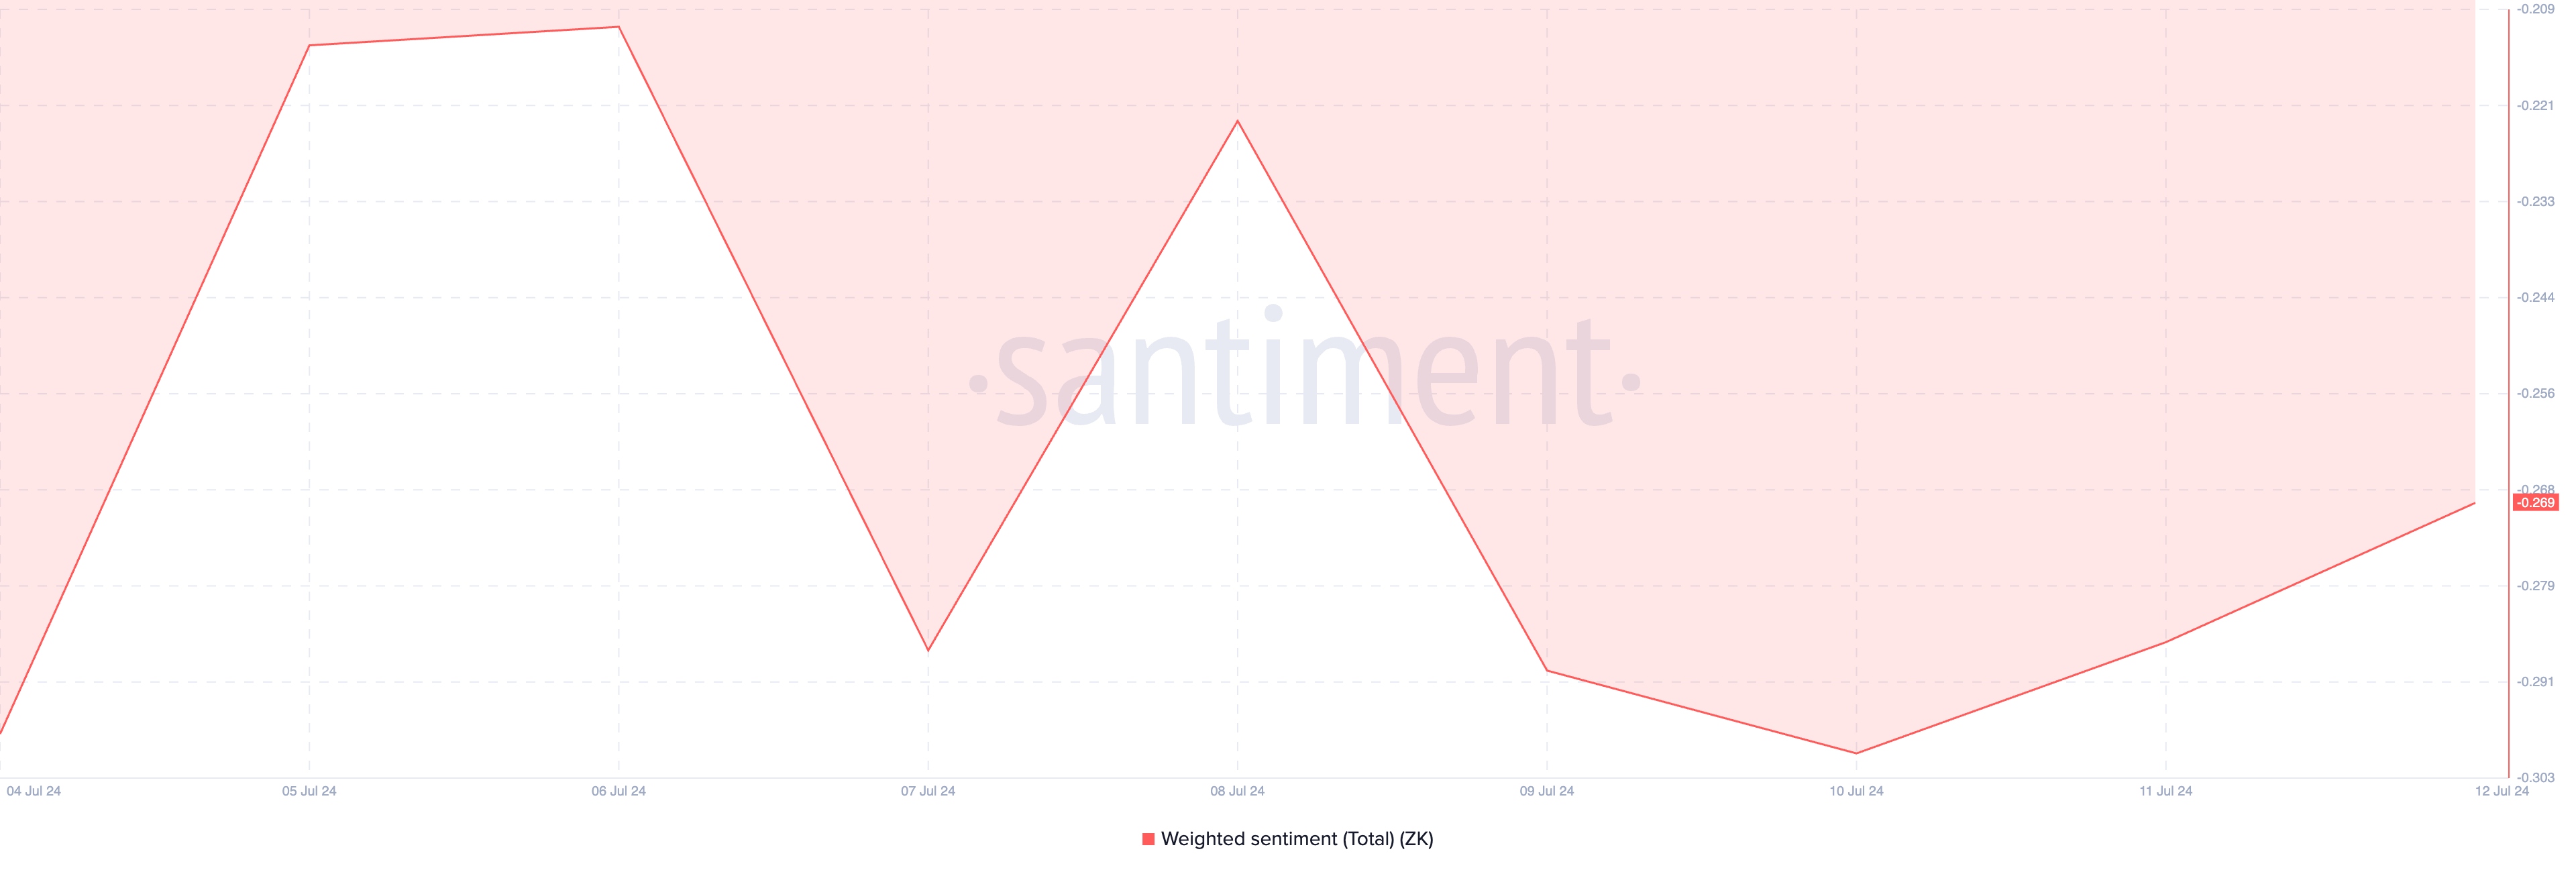 ZK Weighted Sentiment. Source: Santiment